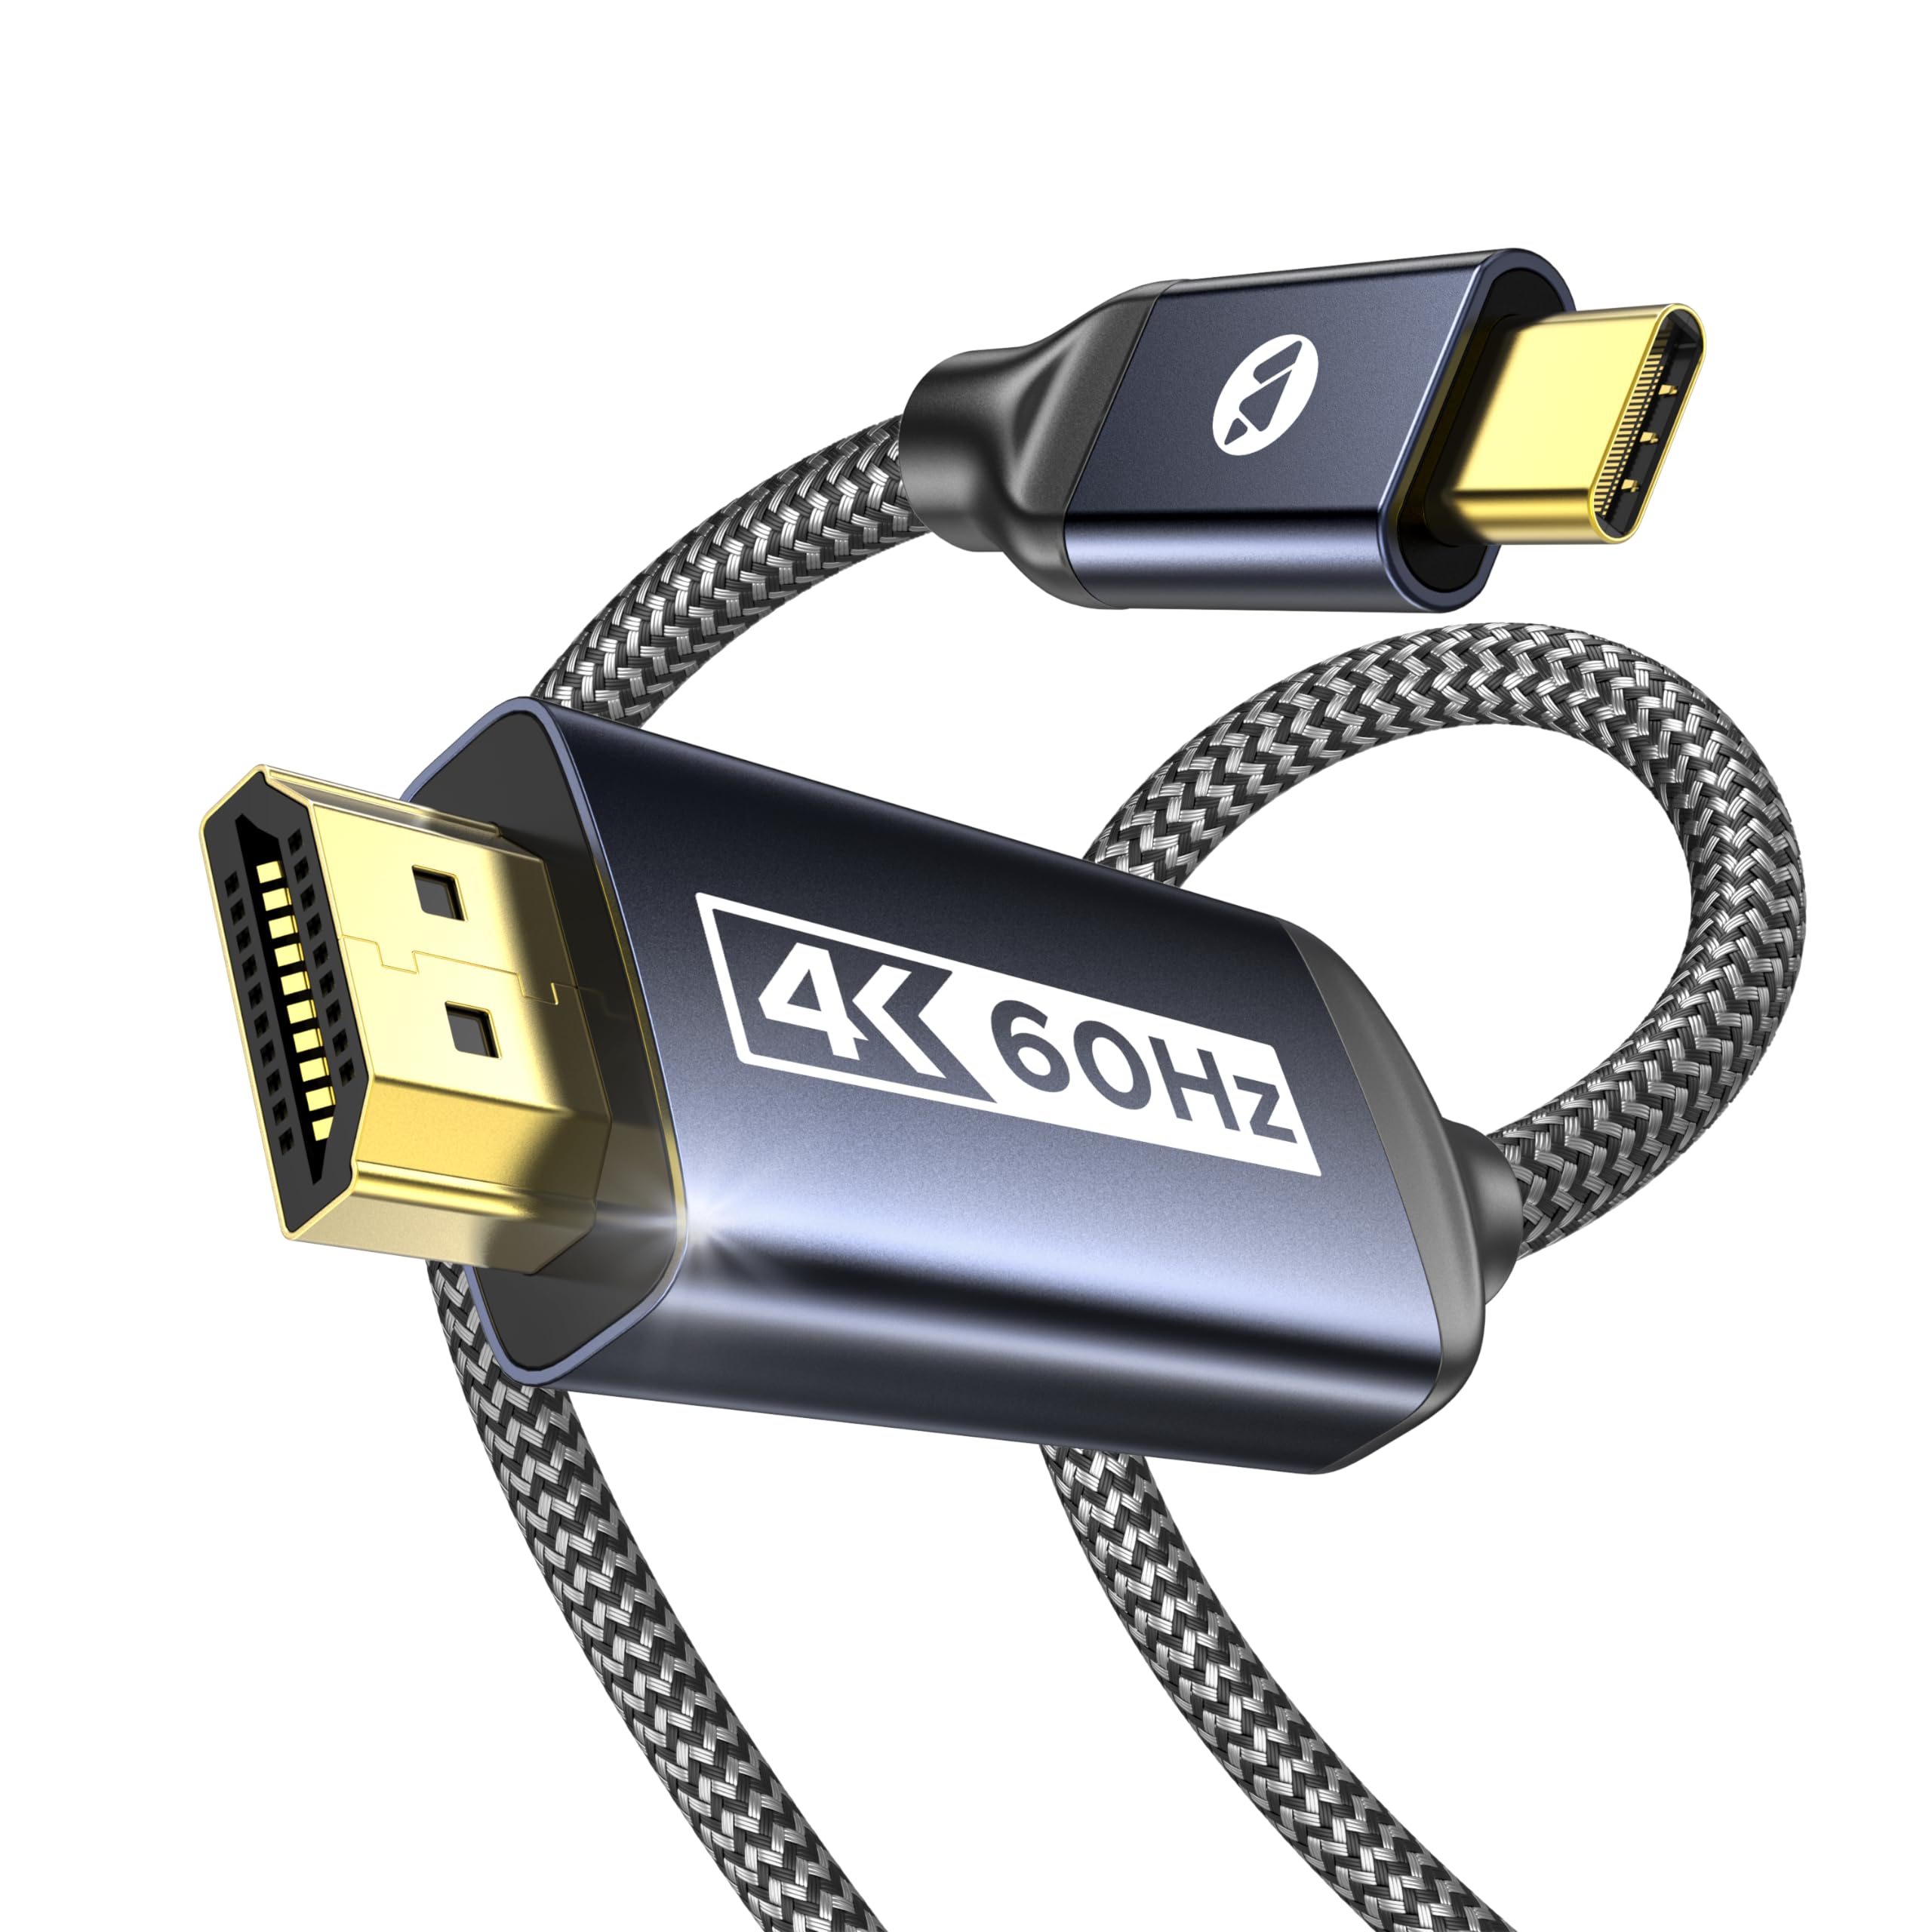 USB-C to HDMI Adapter Cable, 4K 60Hz, HDCP 2.2, 15 ft.